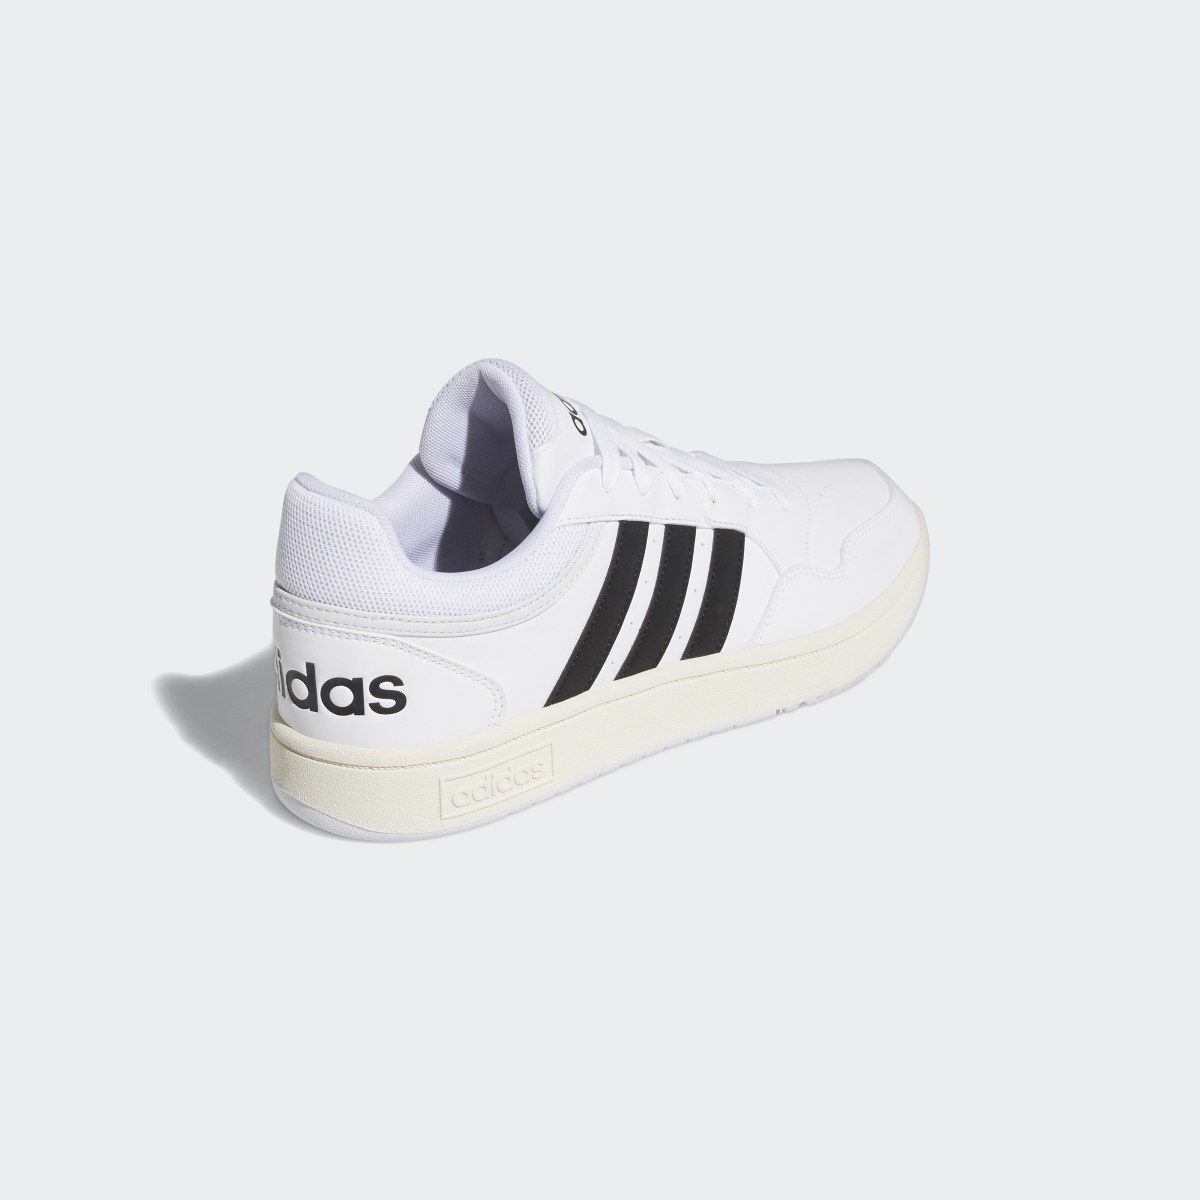 Adidas Chaussure Hoops 3.0 Low Classic Vintage. 6